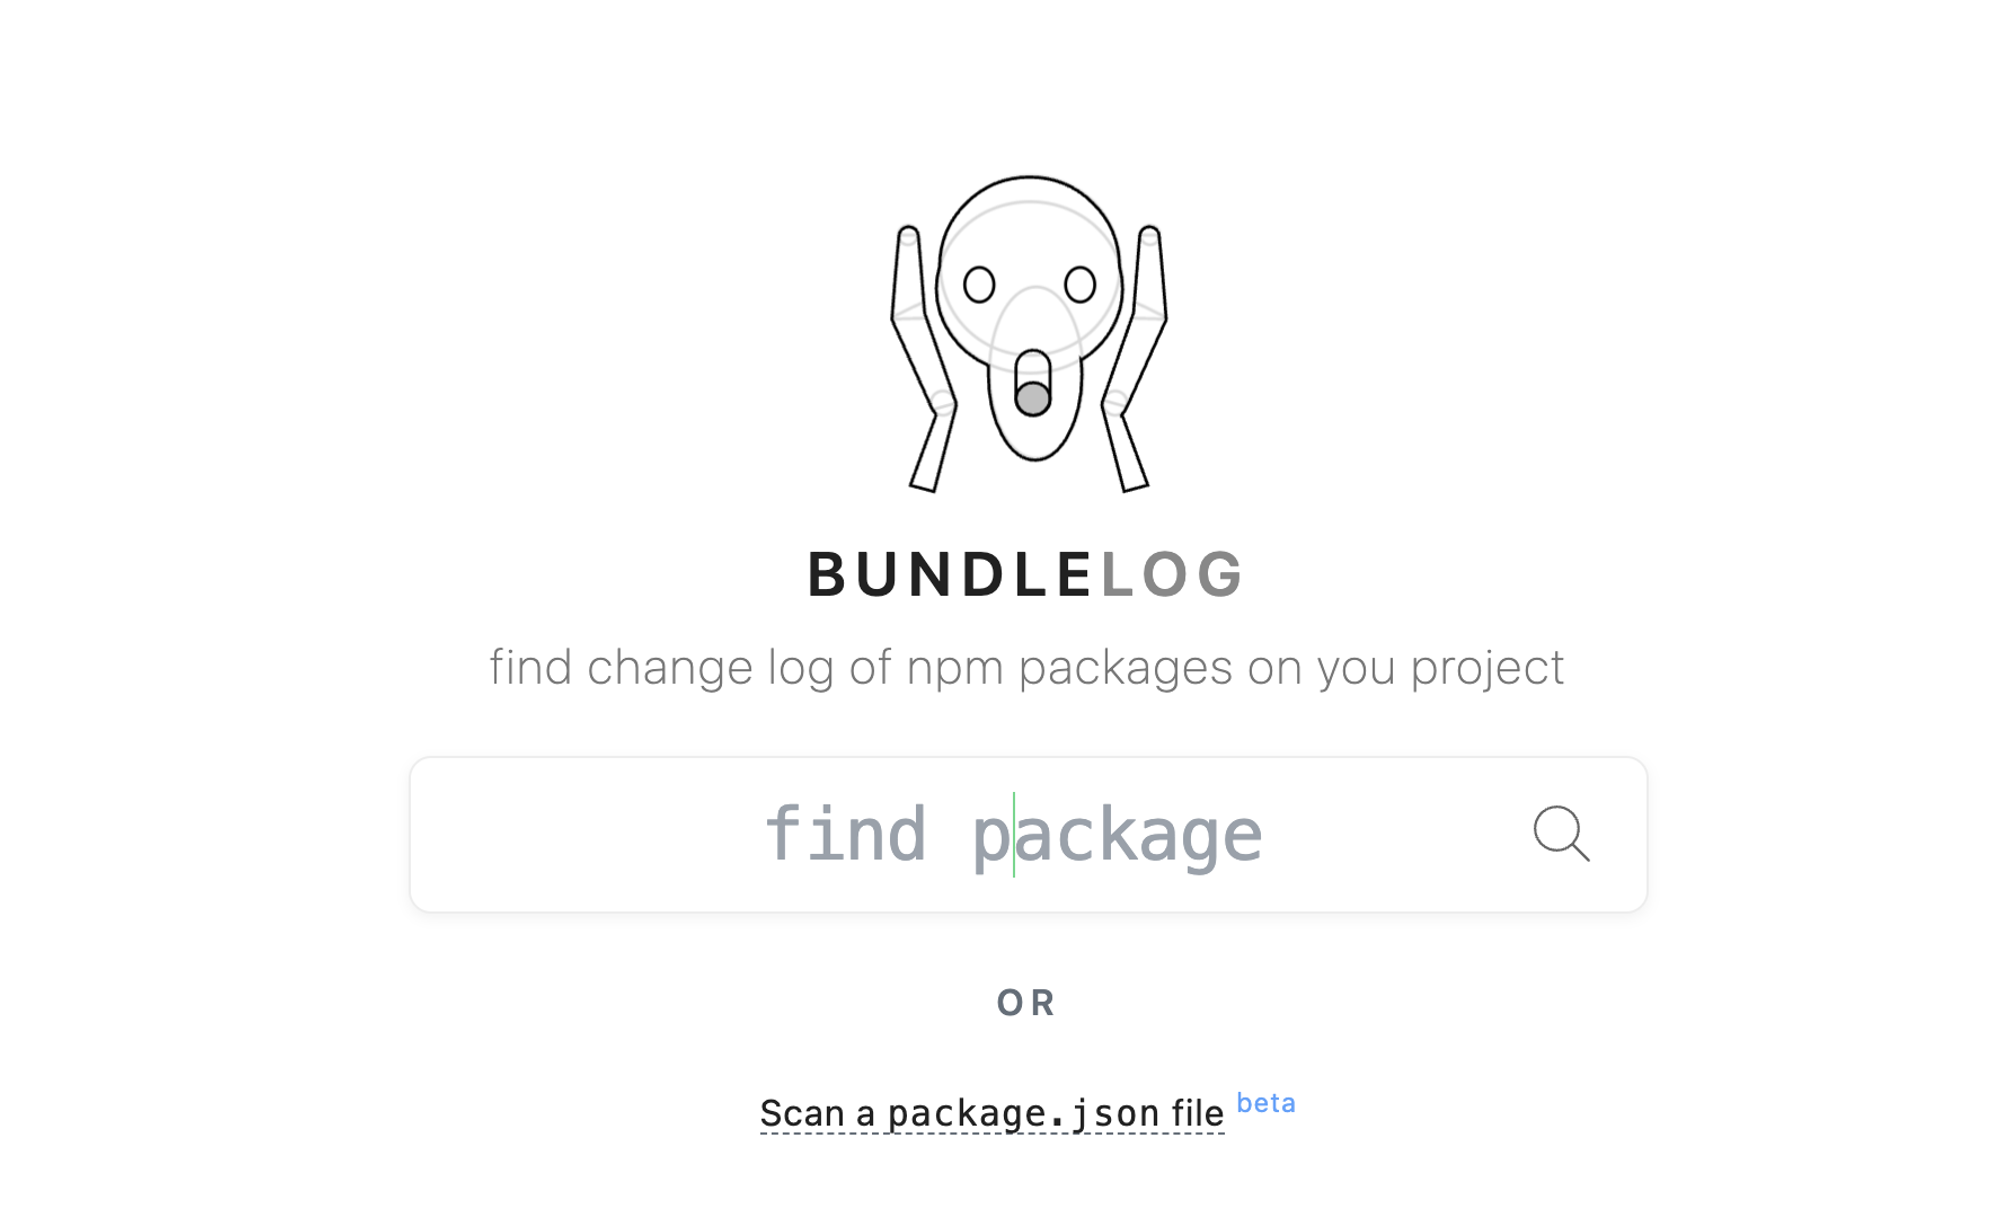 Find change log of npm packages on your project